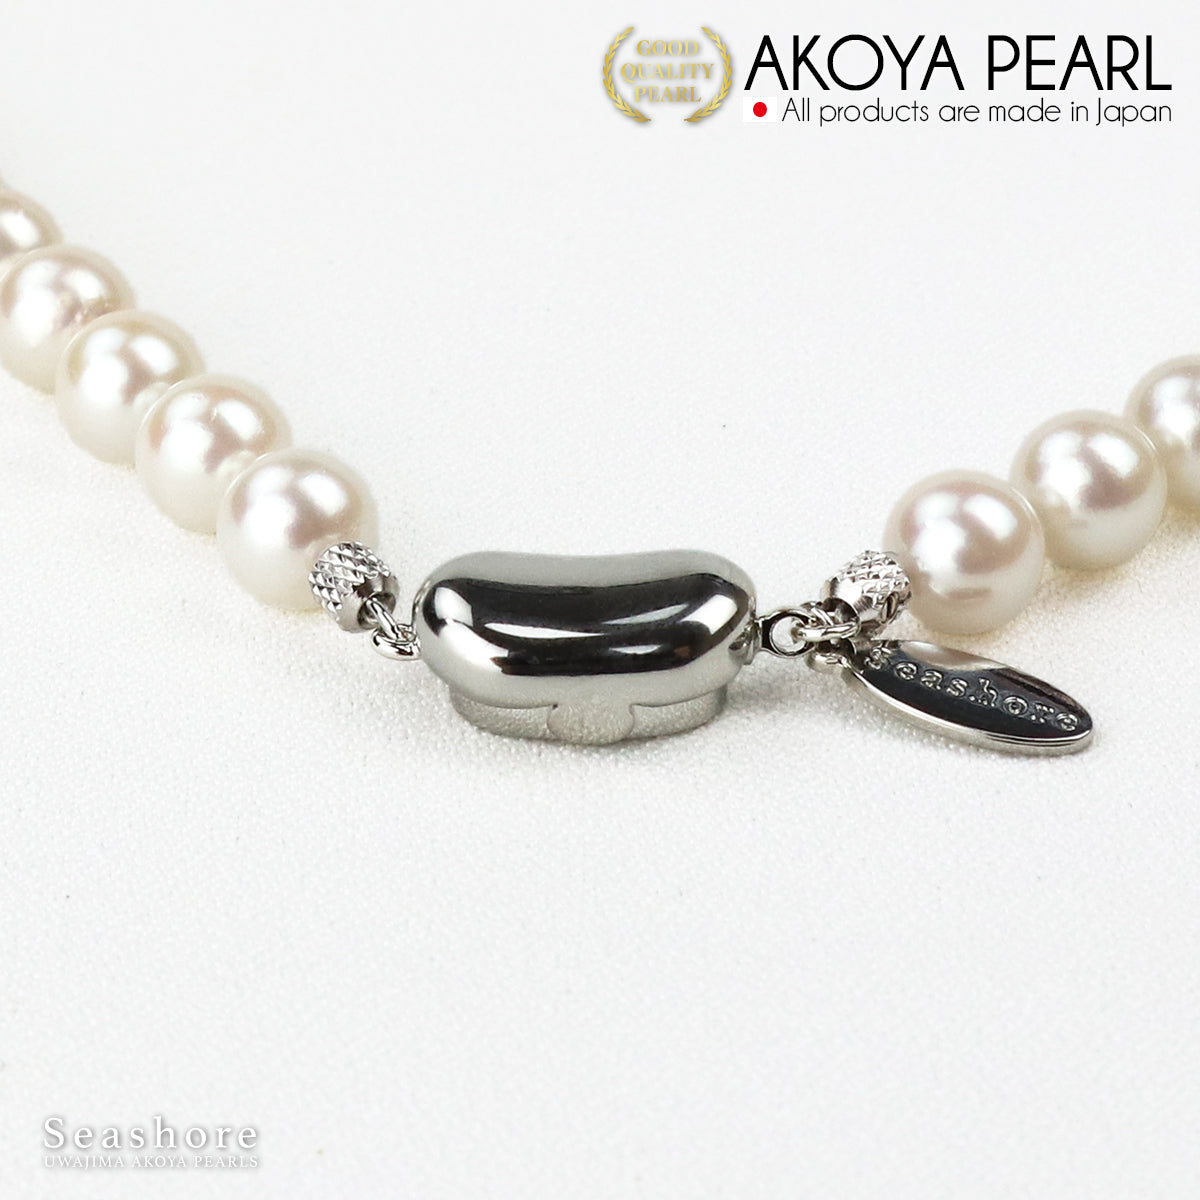 [Specially selected flower beads: Grace pearl] Formal necklace 2-piece set Akoya pearl earrings/piercing [8.5-9.0mm] White Roll thickness 0.4mm or more Certificate of authenticity Storage case included